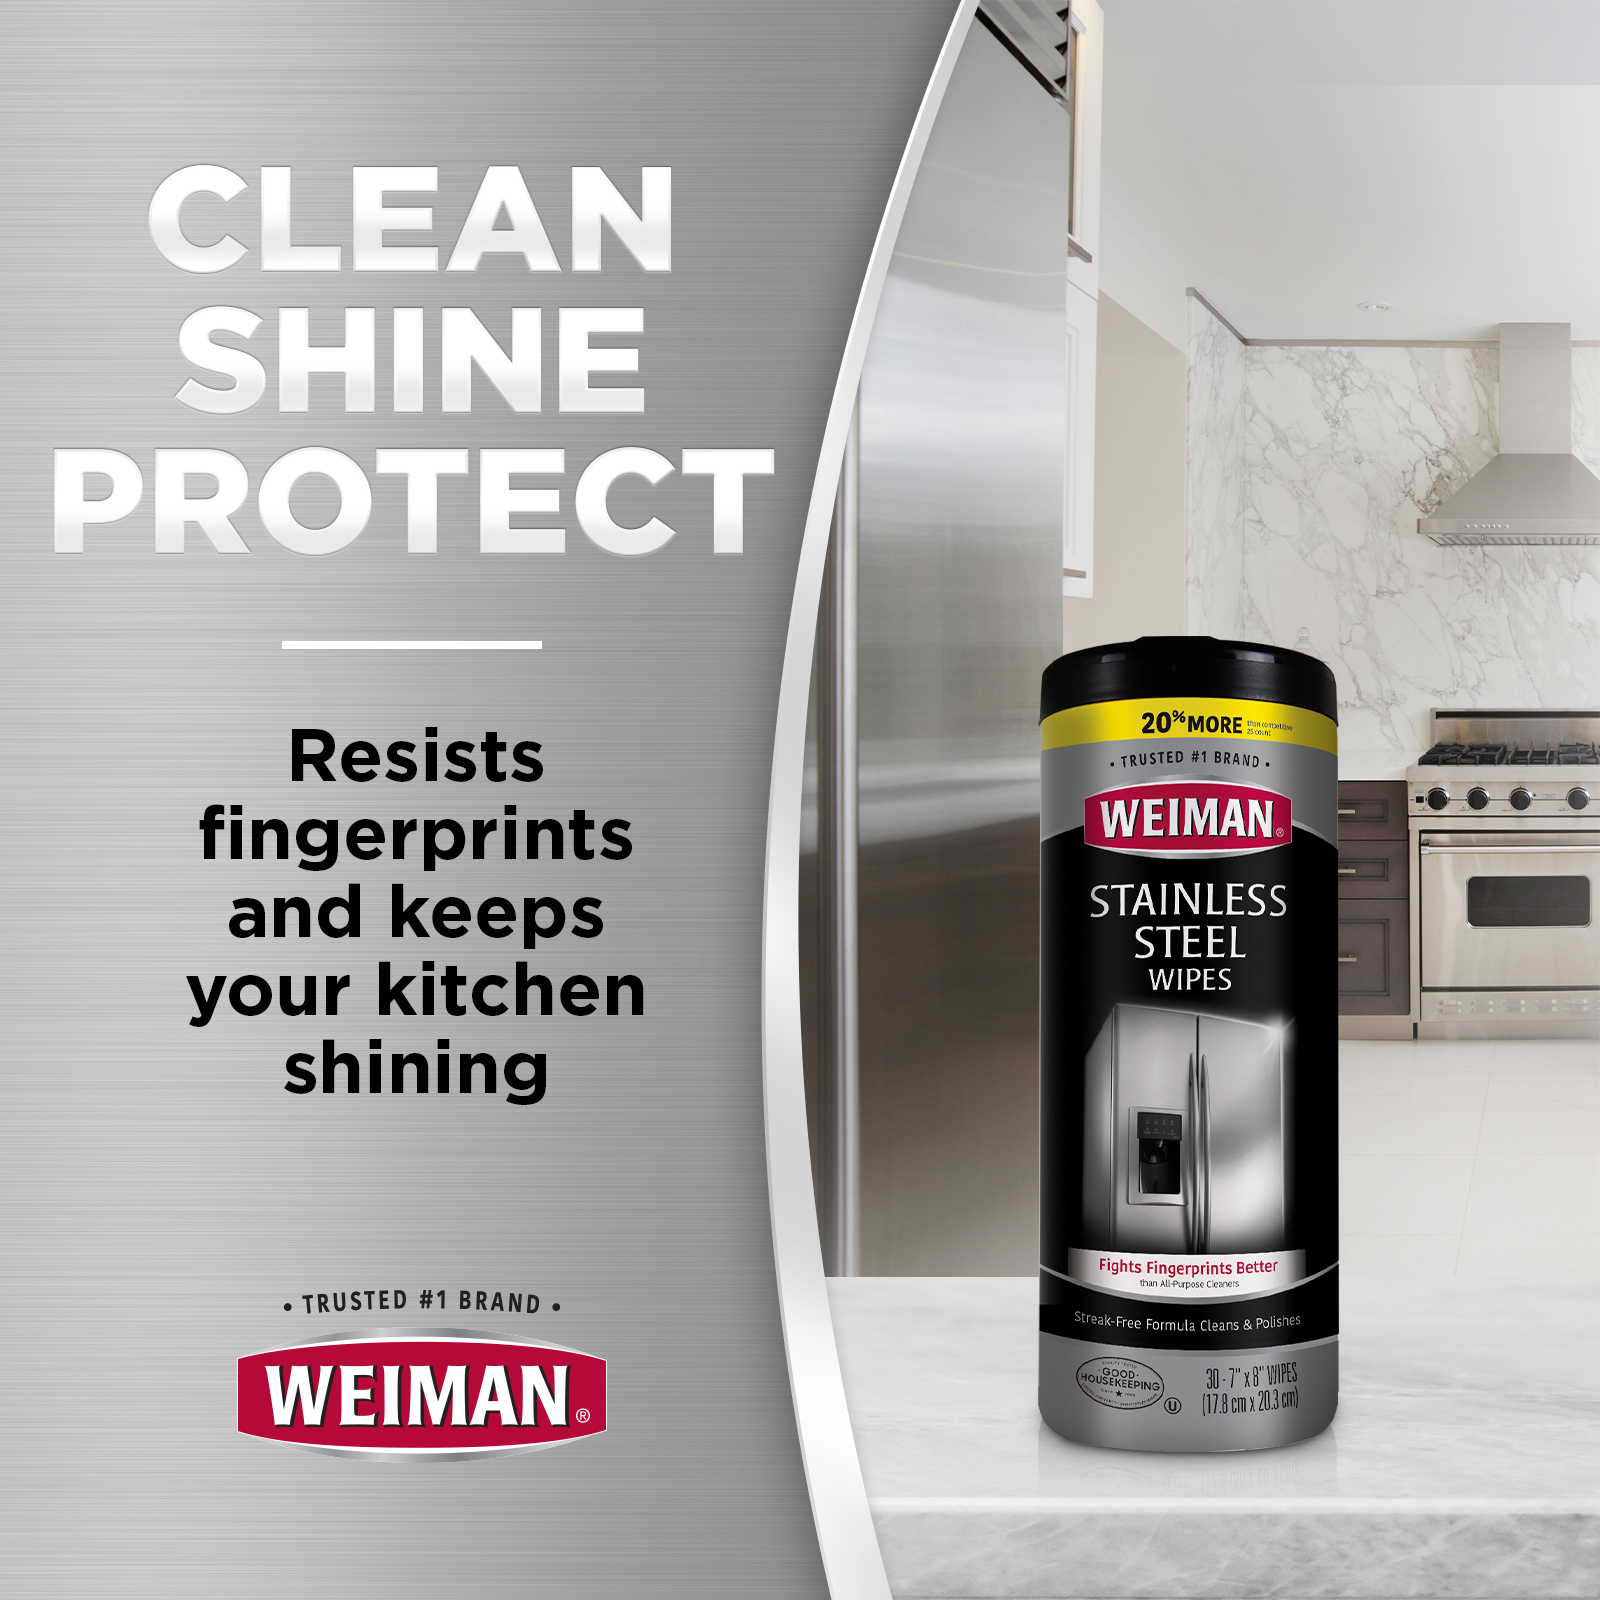 Weiman Stainless Steel Appliance Cleaning Wipes,  Streak-Free Shine, 30 Count - image 3 of 8